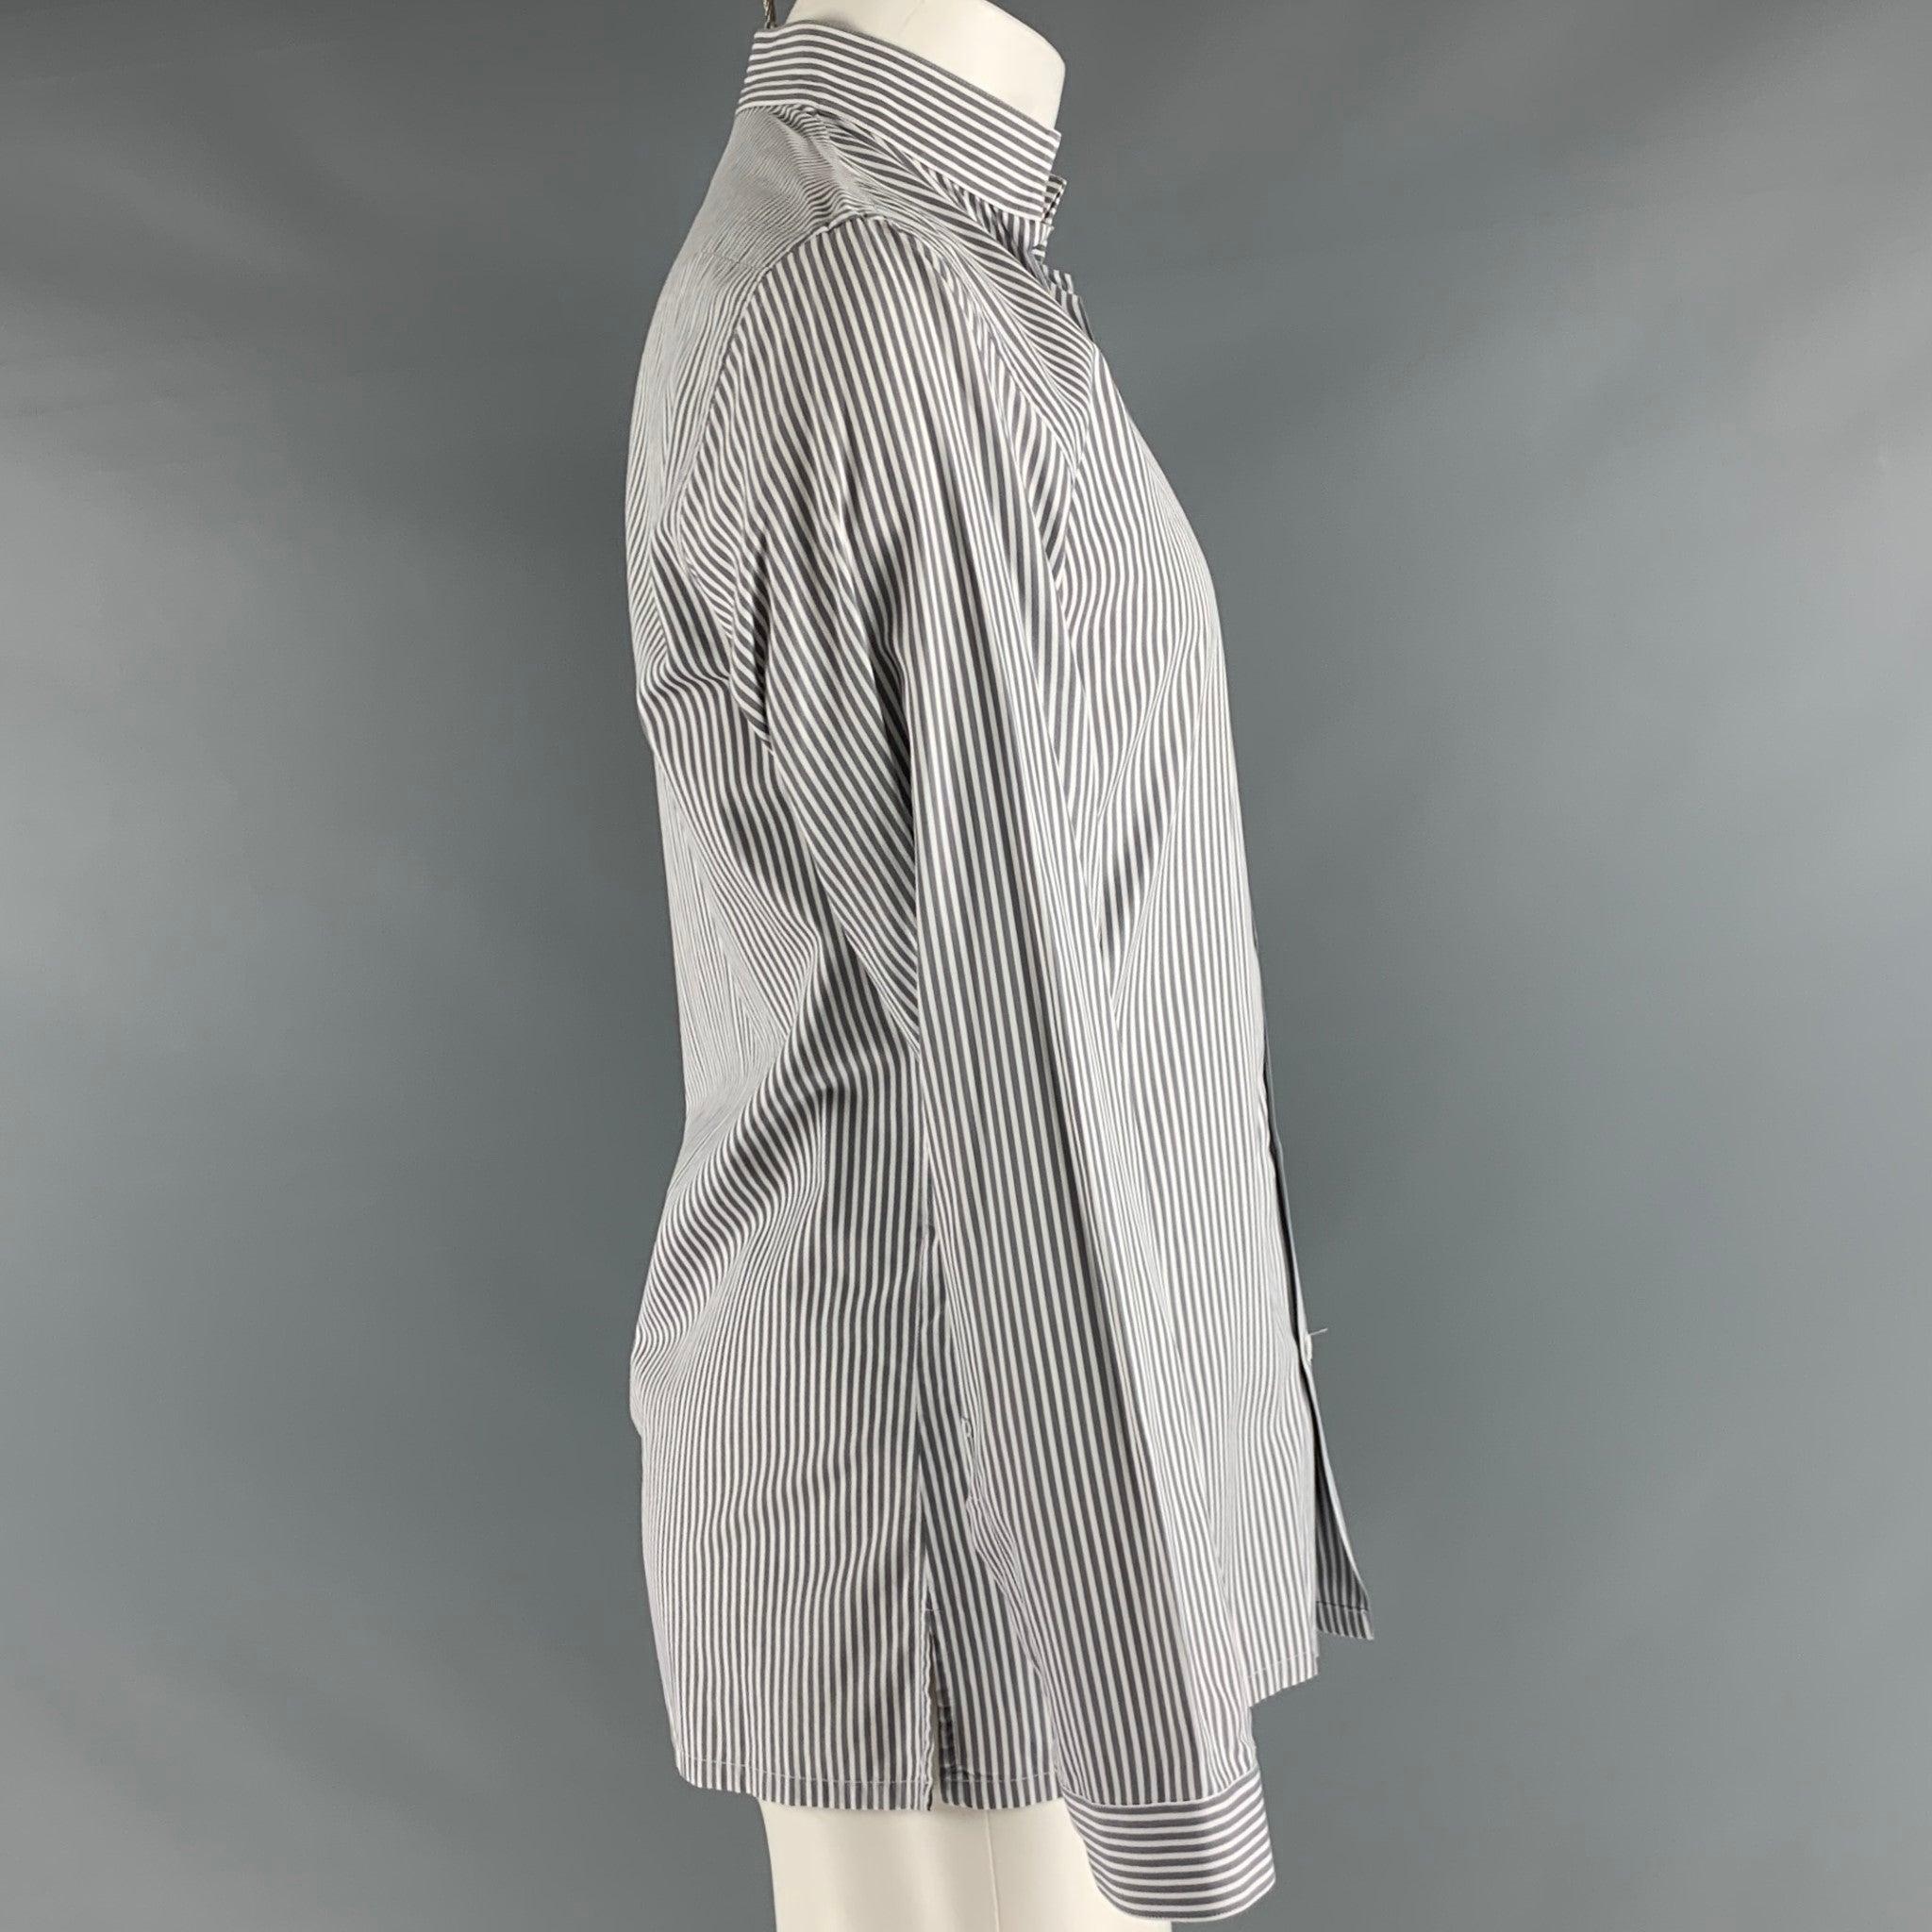 CHRISTIAN DIOR long sleeve shirt
in a grey and white fabric featuring vertical stripes, 